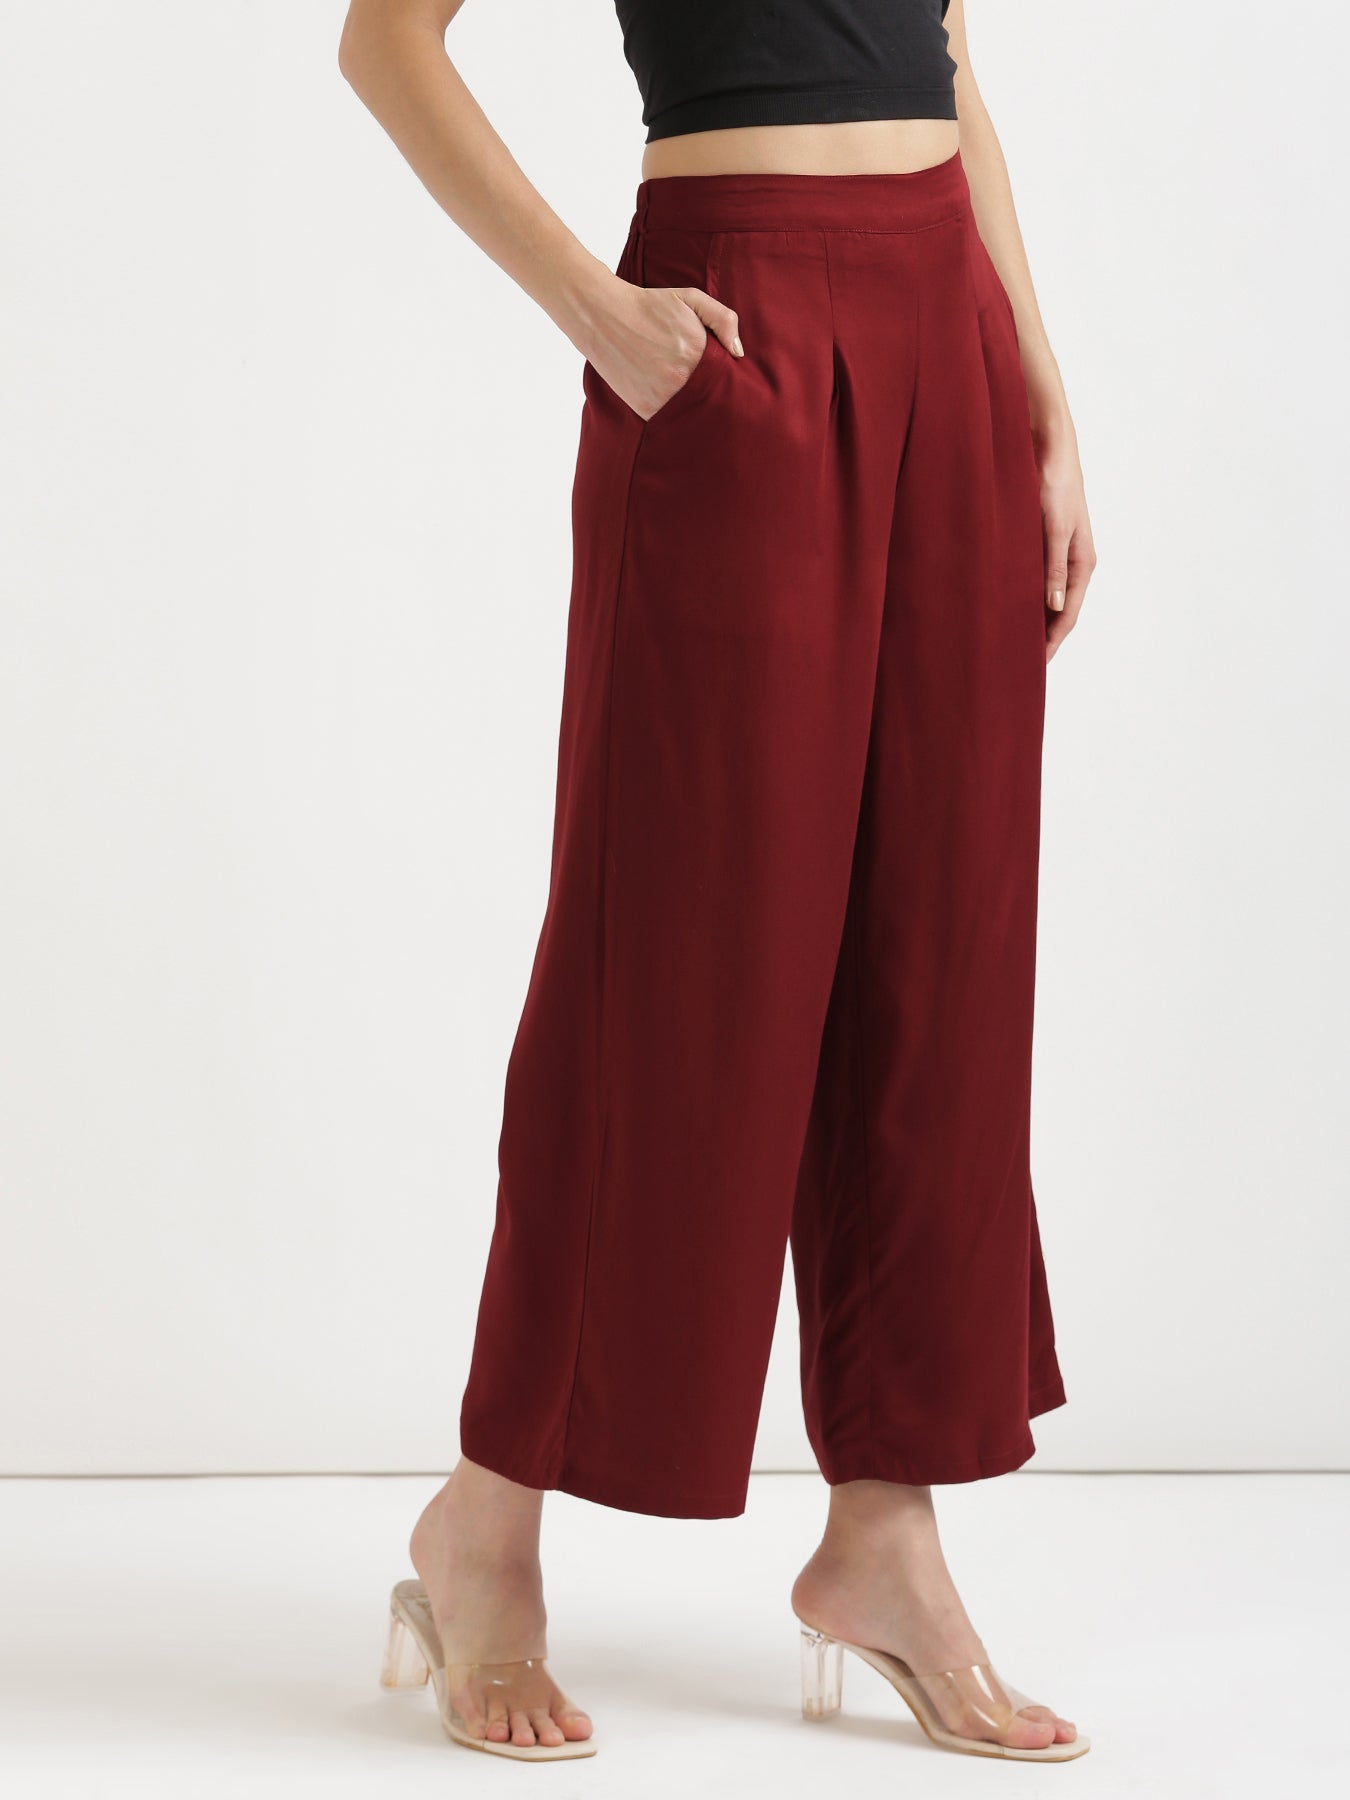 Buy Style Icon Women'S Rayon regular Bottom Palazzo Trousers Having Pockets  On Both Side, Plain Colour With Elastic Waist (Pack Of 3) - Black, Maroon,  White(XXL) at Amazon.in